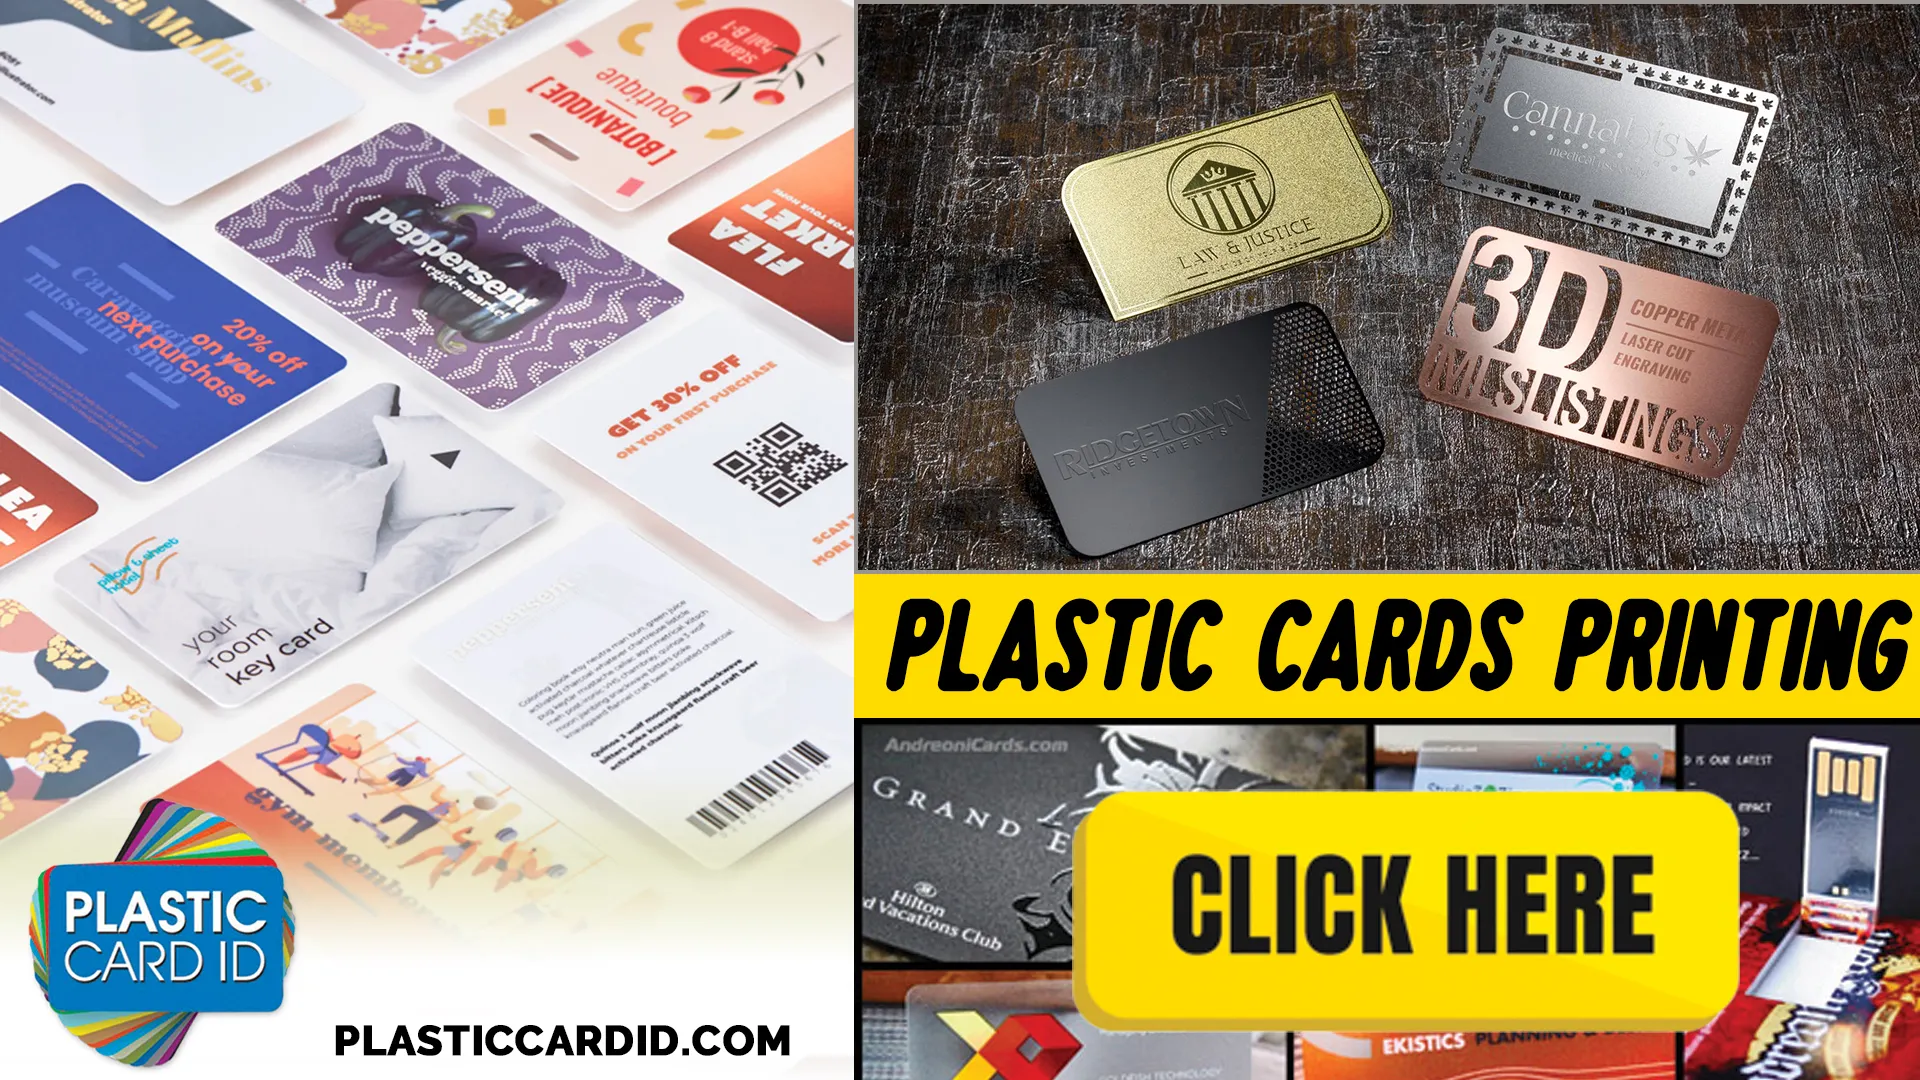 Adapting Plastic Cards to a Digital-First World